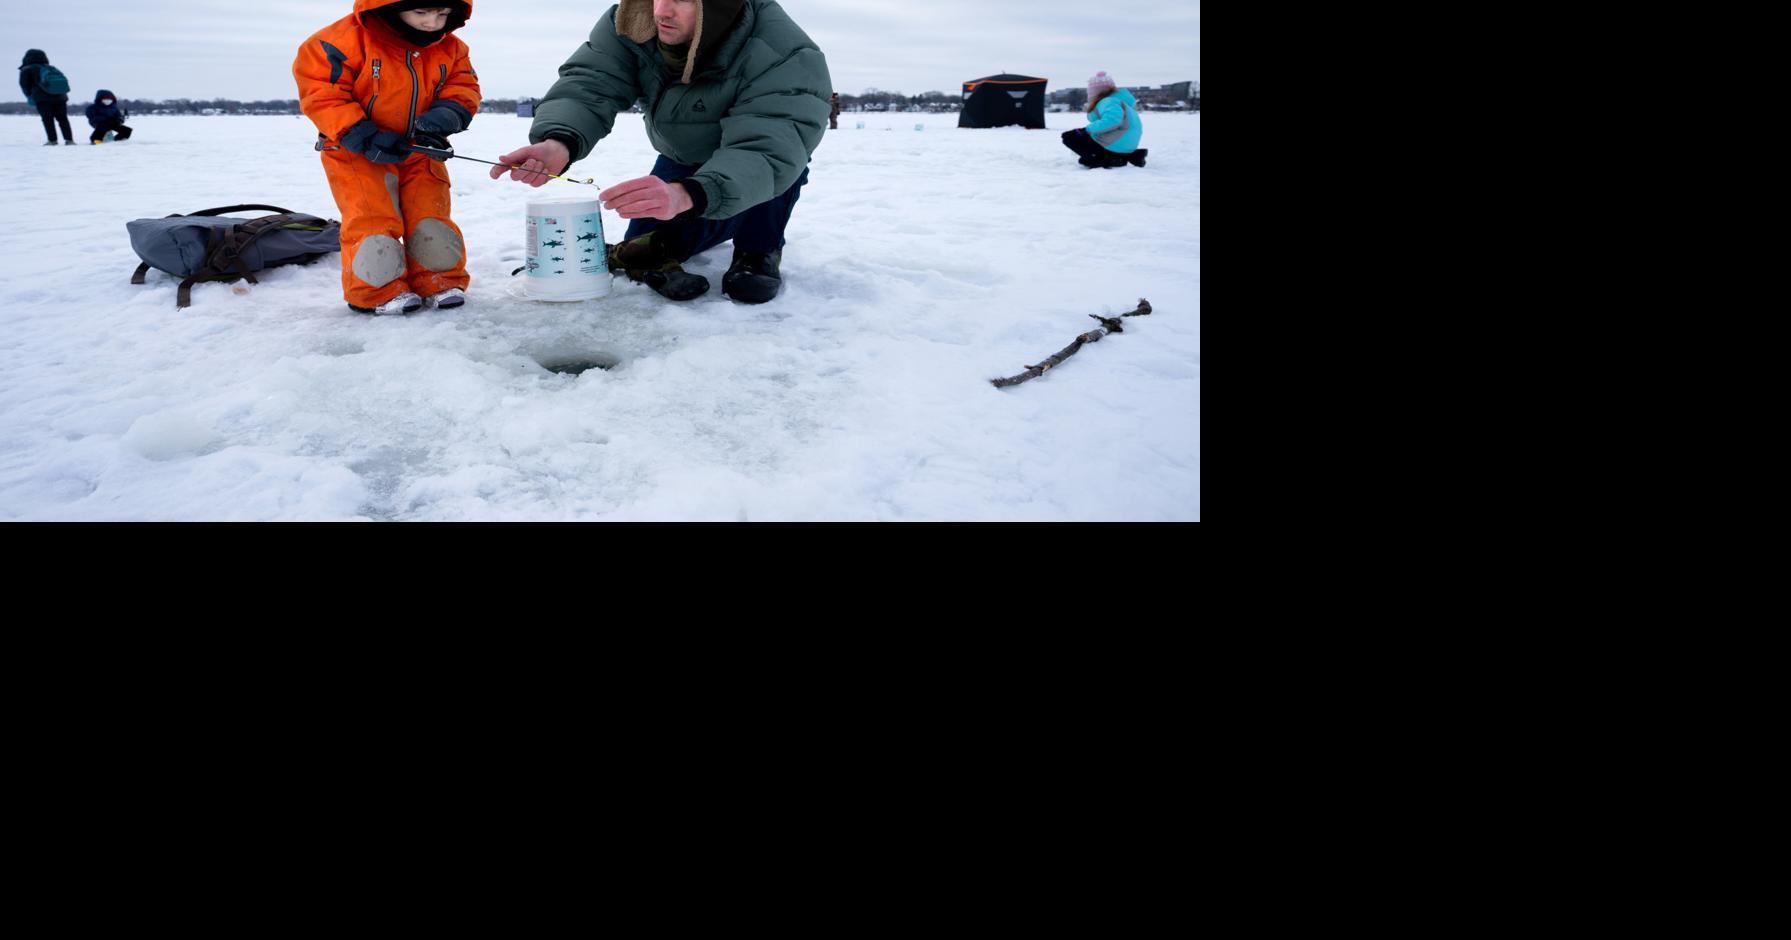 Photos: Children learn to ice fish on Lake Monona during annual event - Madison.com